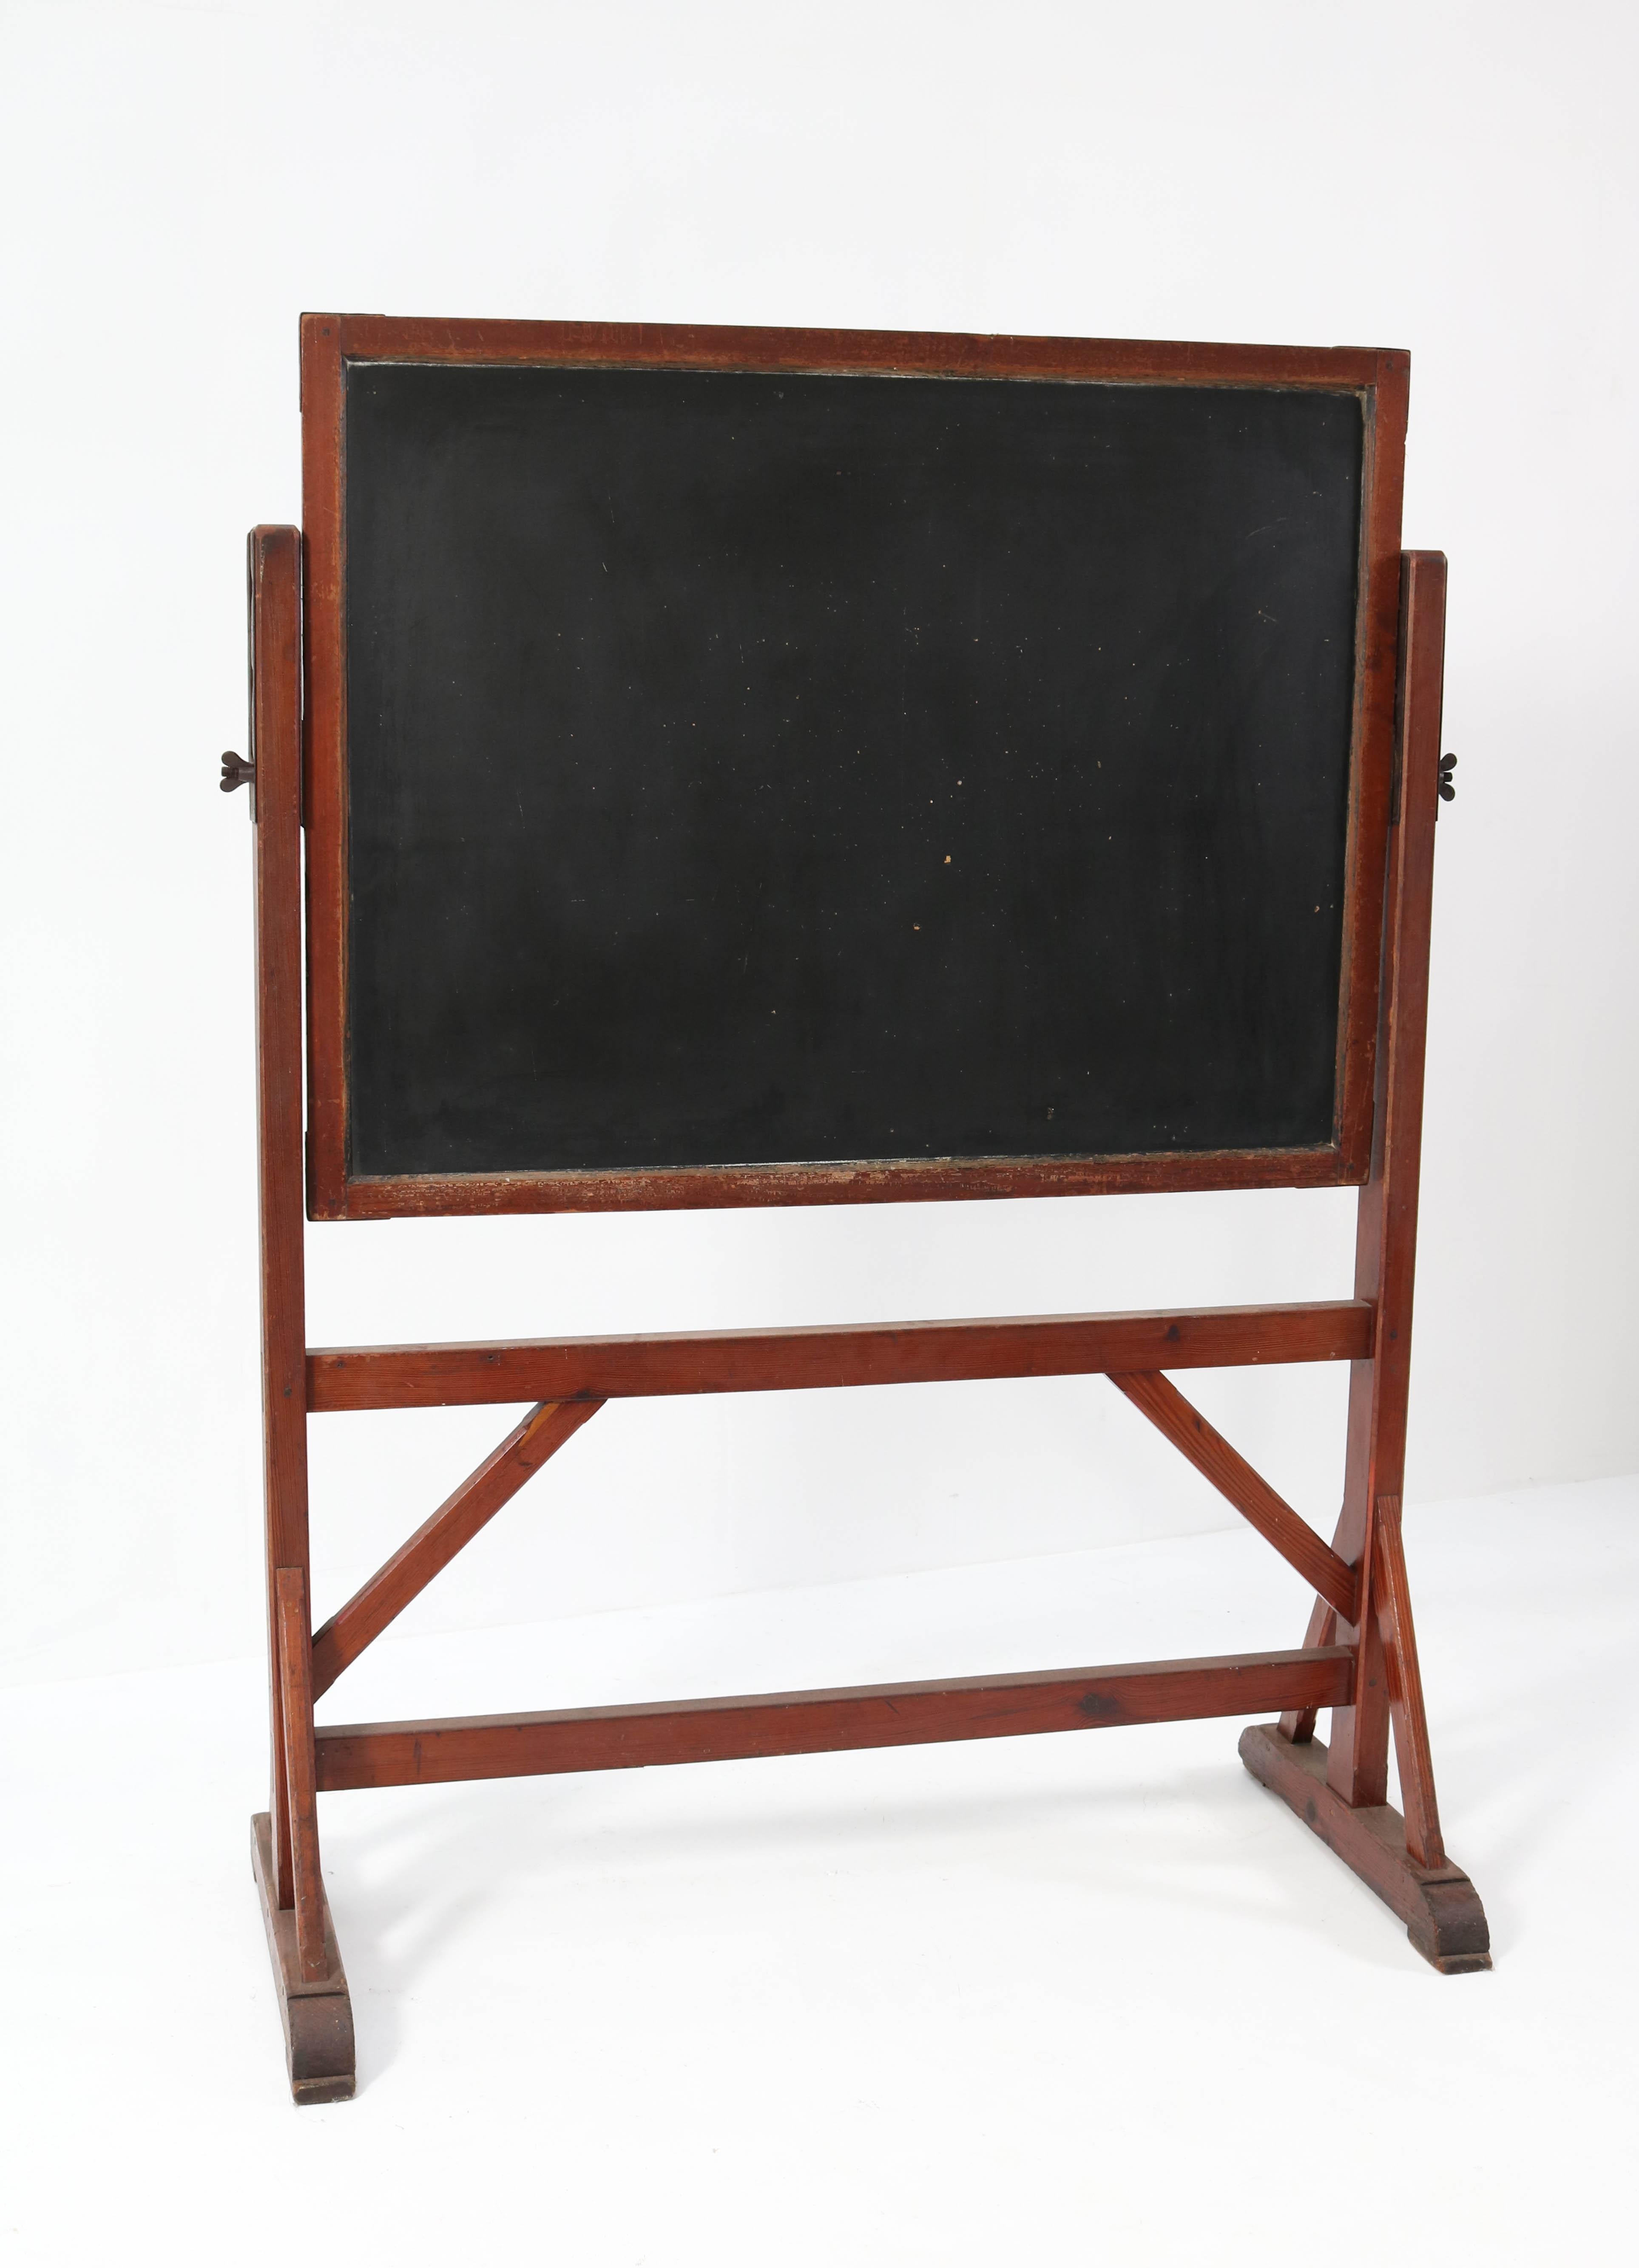 Magnificent and rare Art Nouveau blackboard chalkboard.
Striking Dutch design from the 1900s.
Solid pitch pine frame with double sided blackboard chalkboard.
This decorative piece of furniture would make the perfect menu board, idea board or